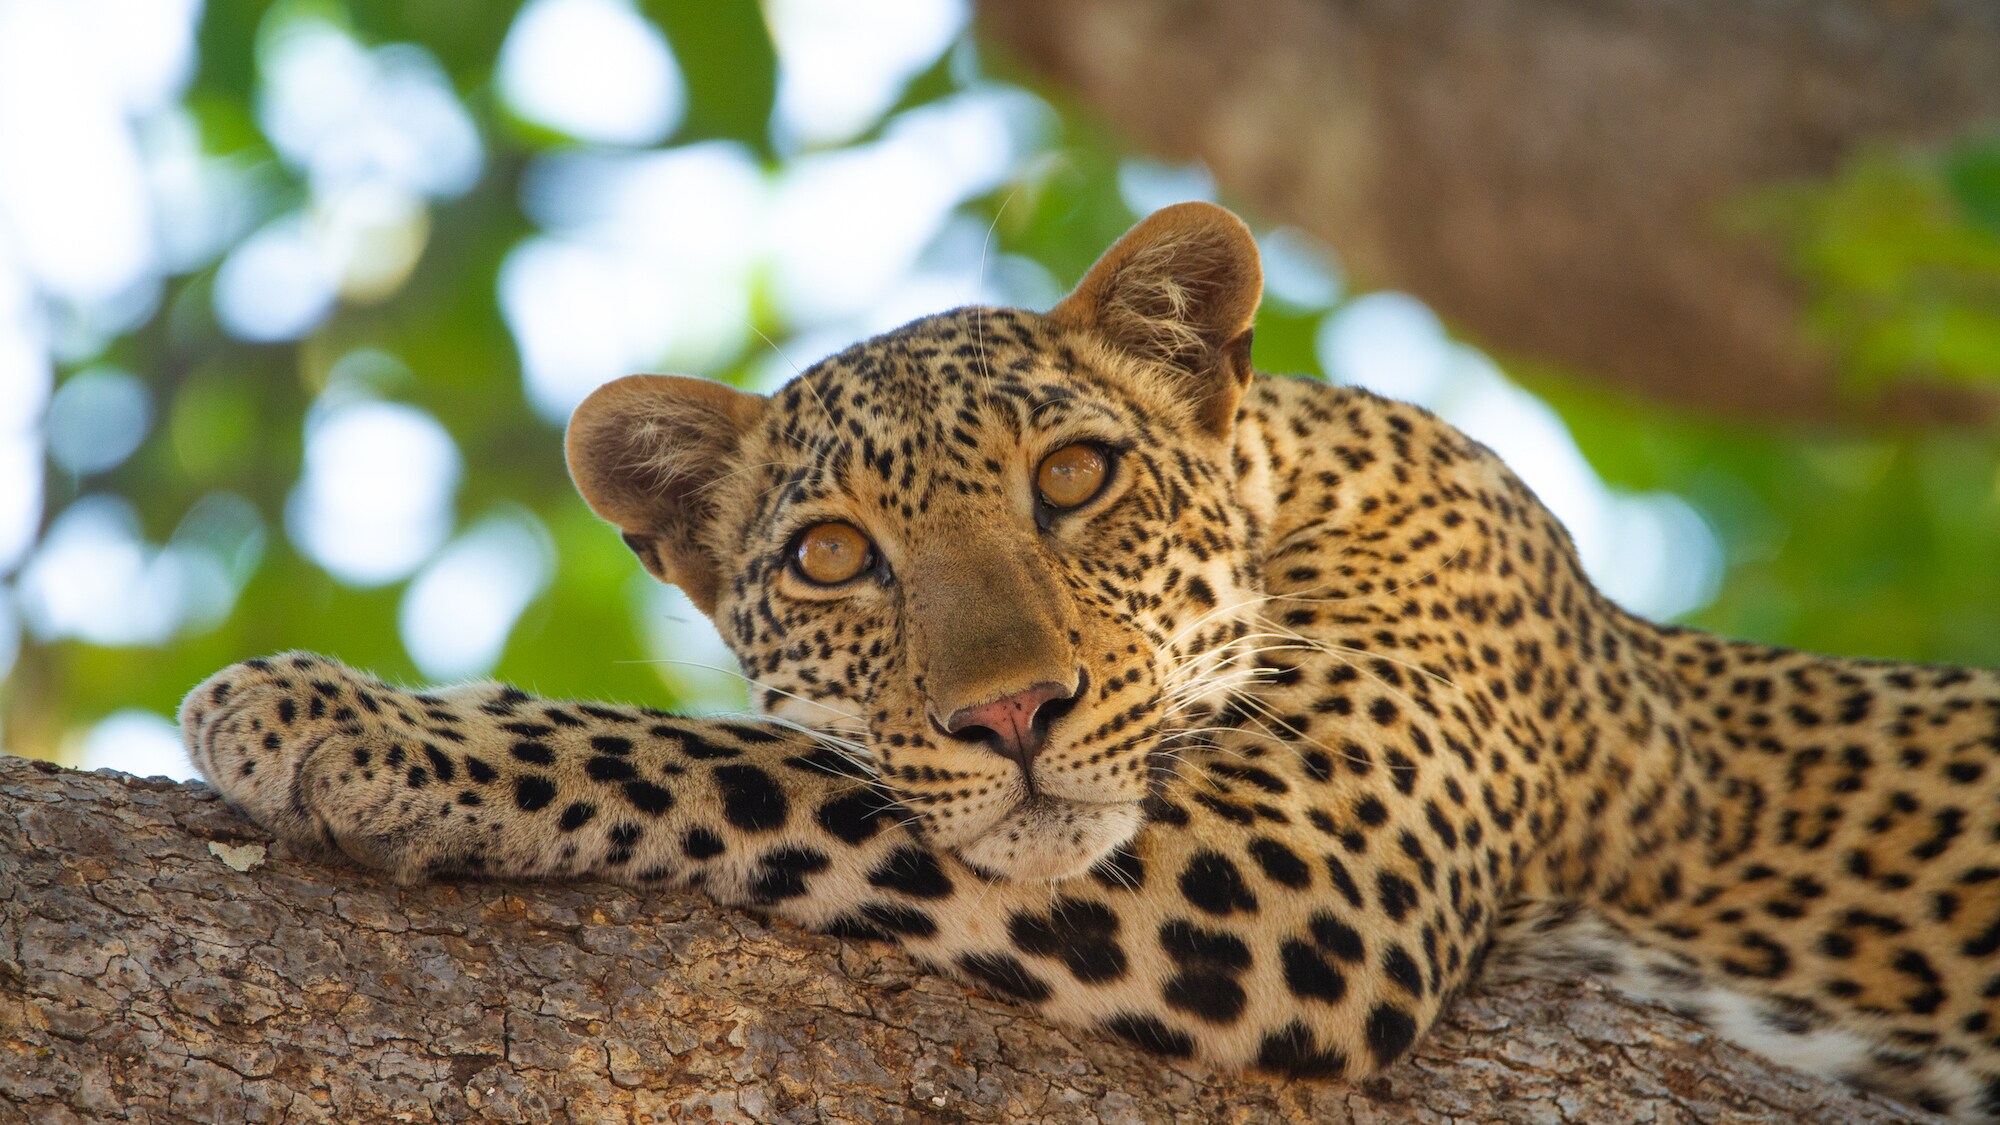 The Luangwa valley is often referred to as 'valley of the leopards'. They can often be found resting in the heat of the day under sausage trees. (Credit: National Geographic/Samson Moyo for Disney+)